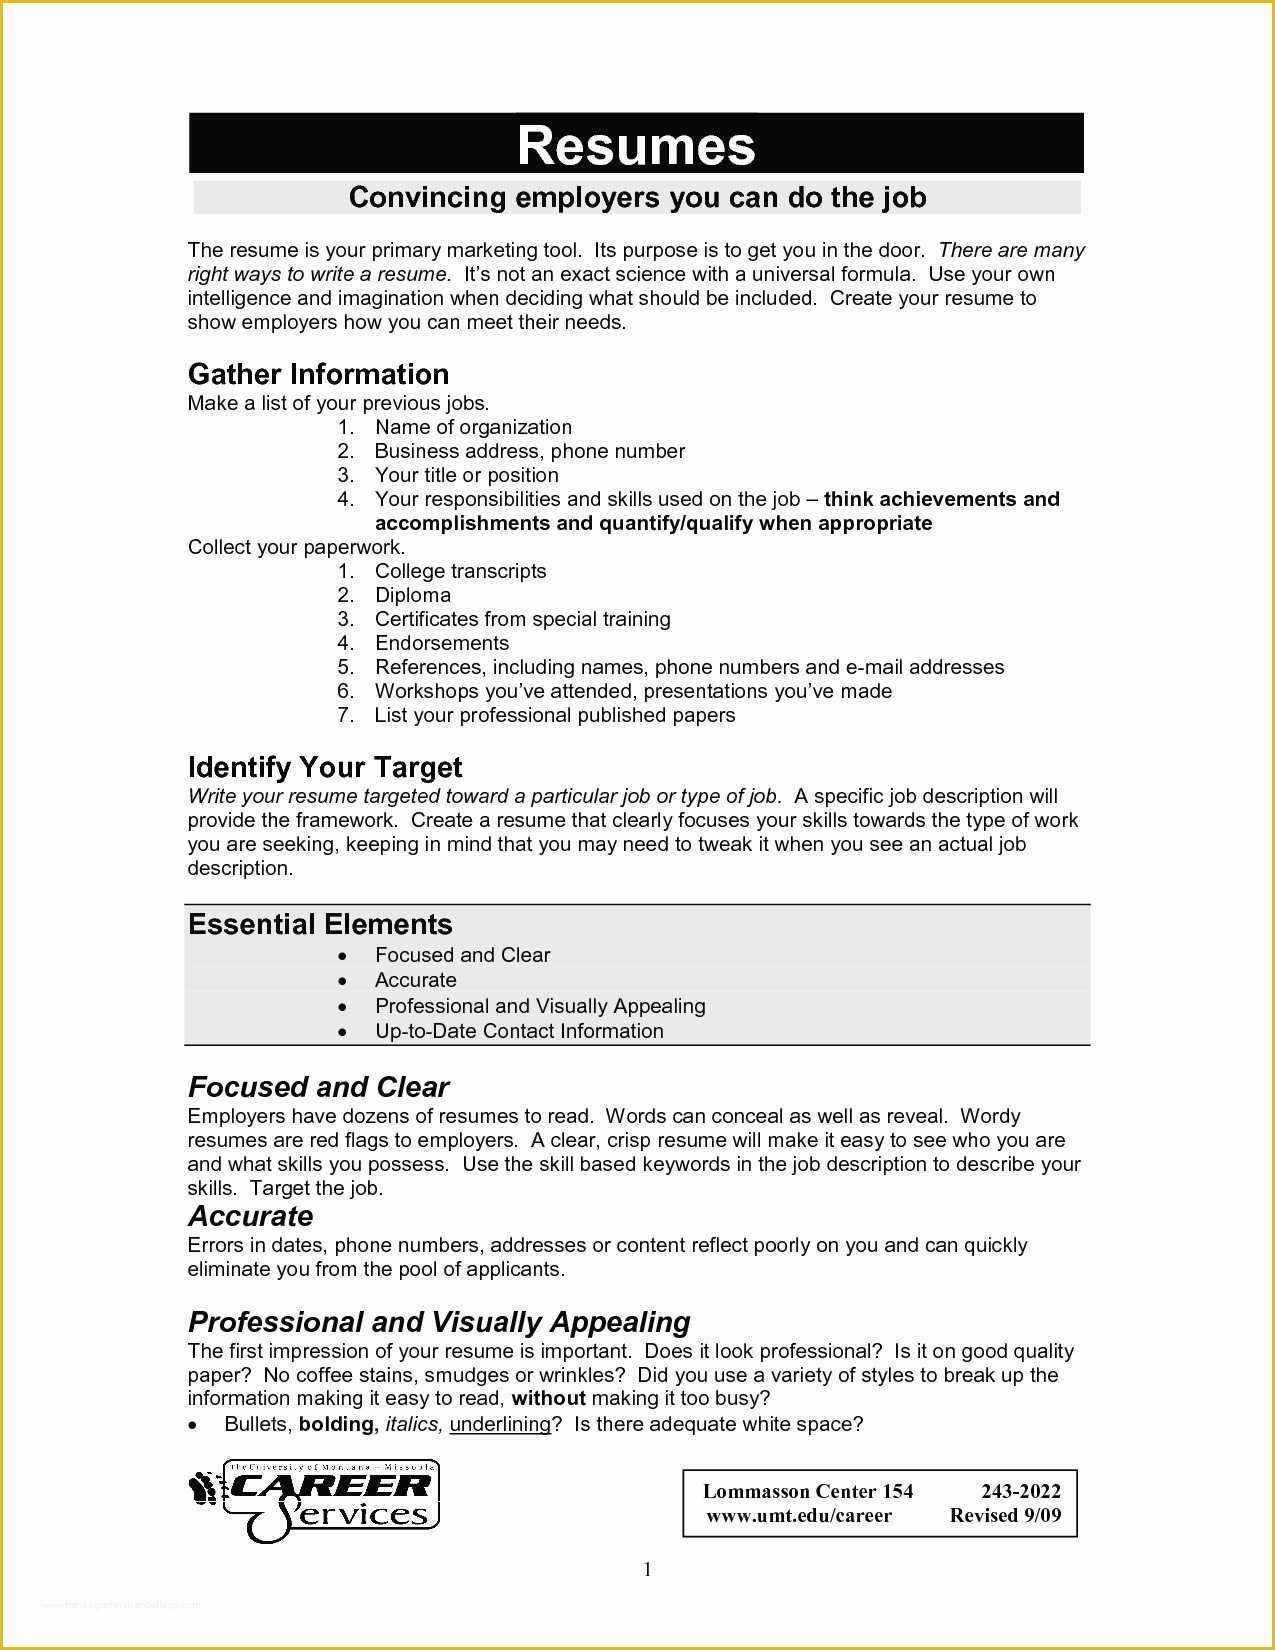 Security Resume Template Free Of Resumes for Jobs Security Resume Job Resume Examples